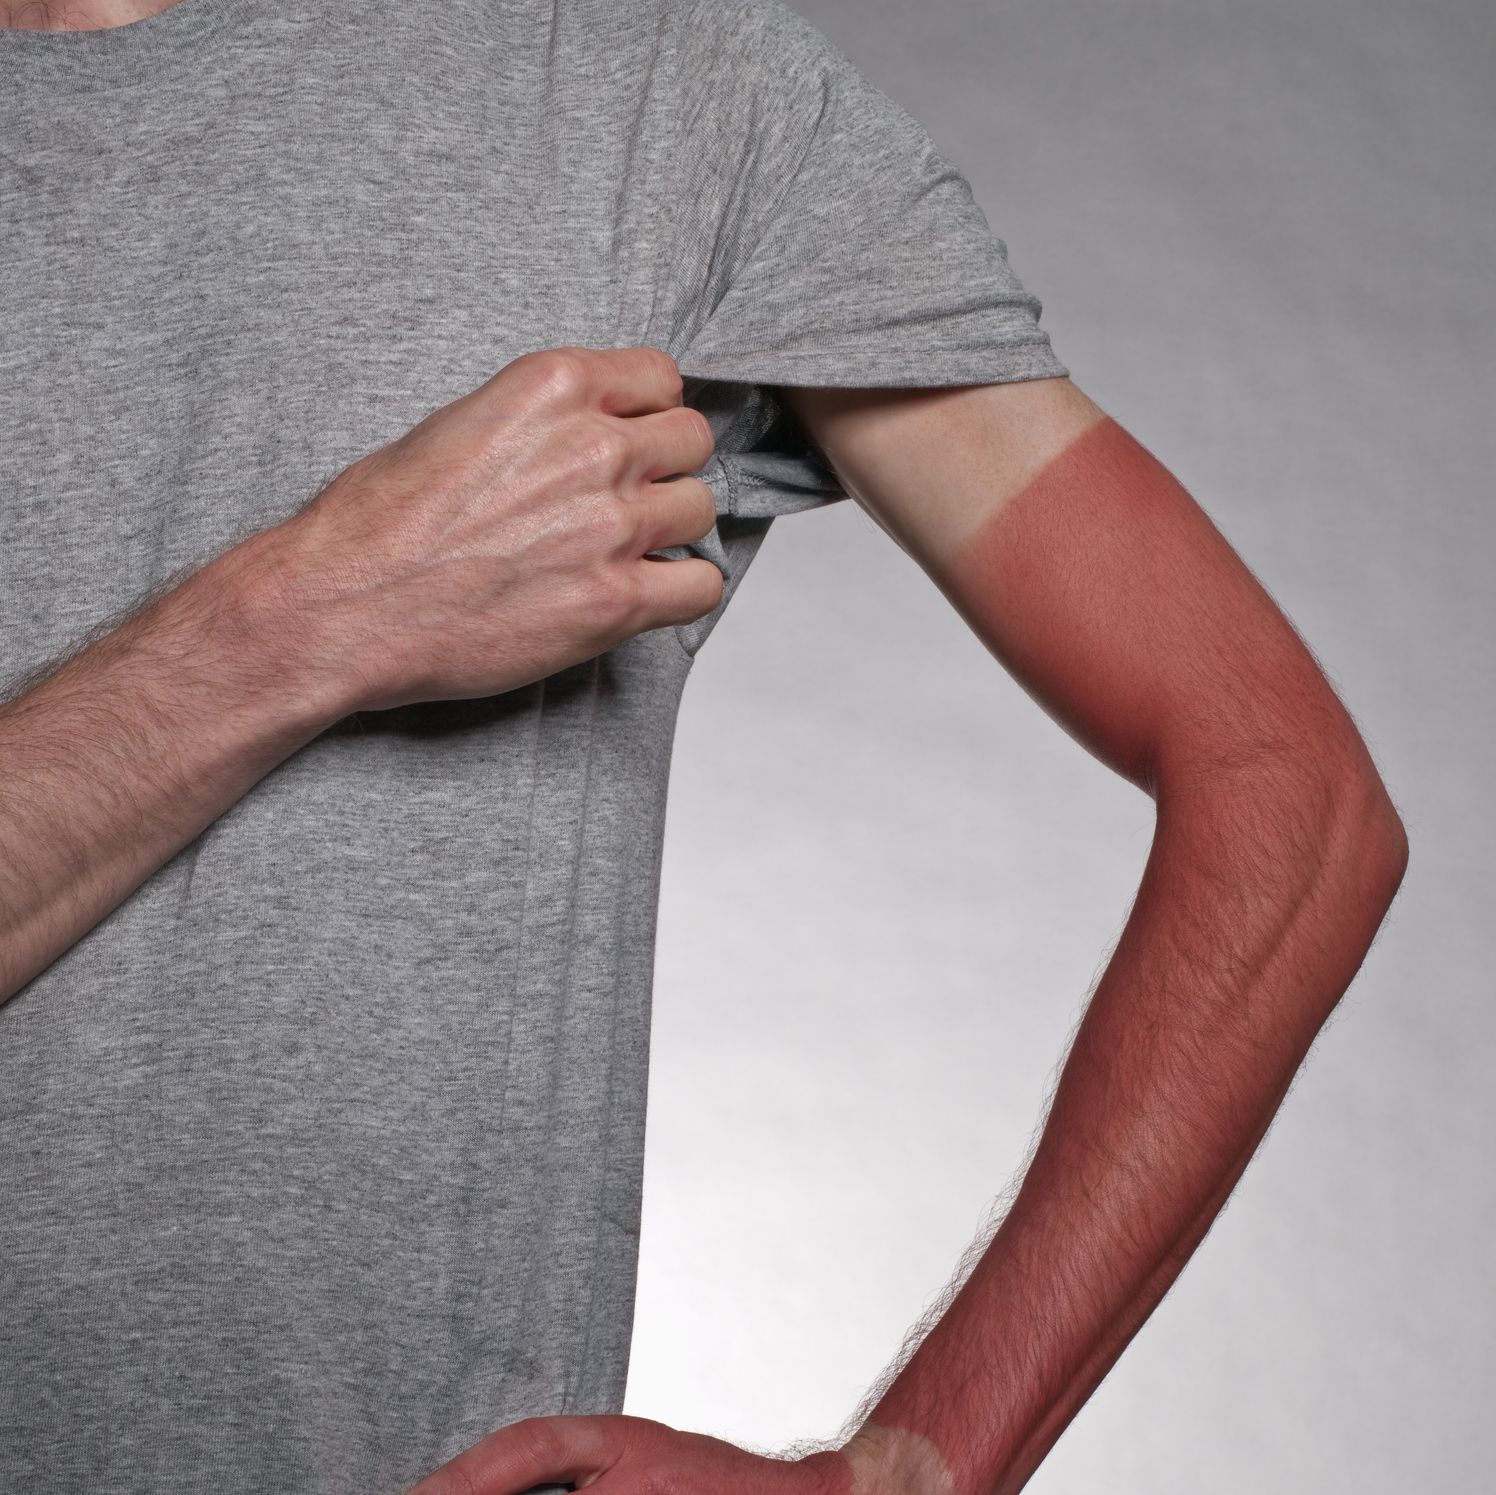 5 Tricks for Getting Rid of That Painful Sunburn